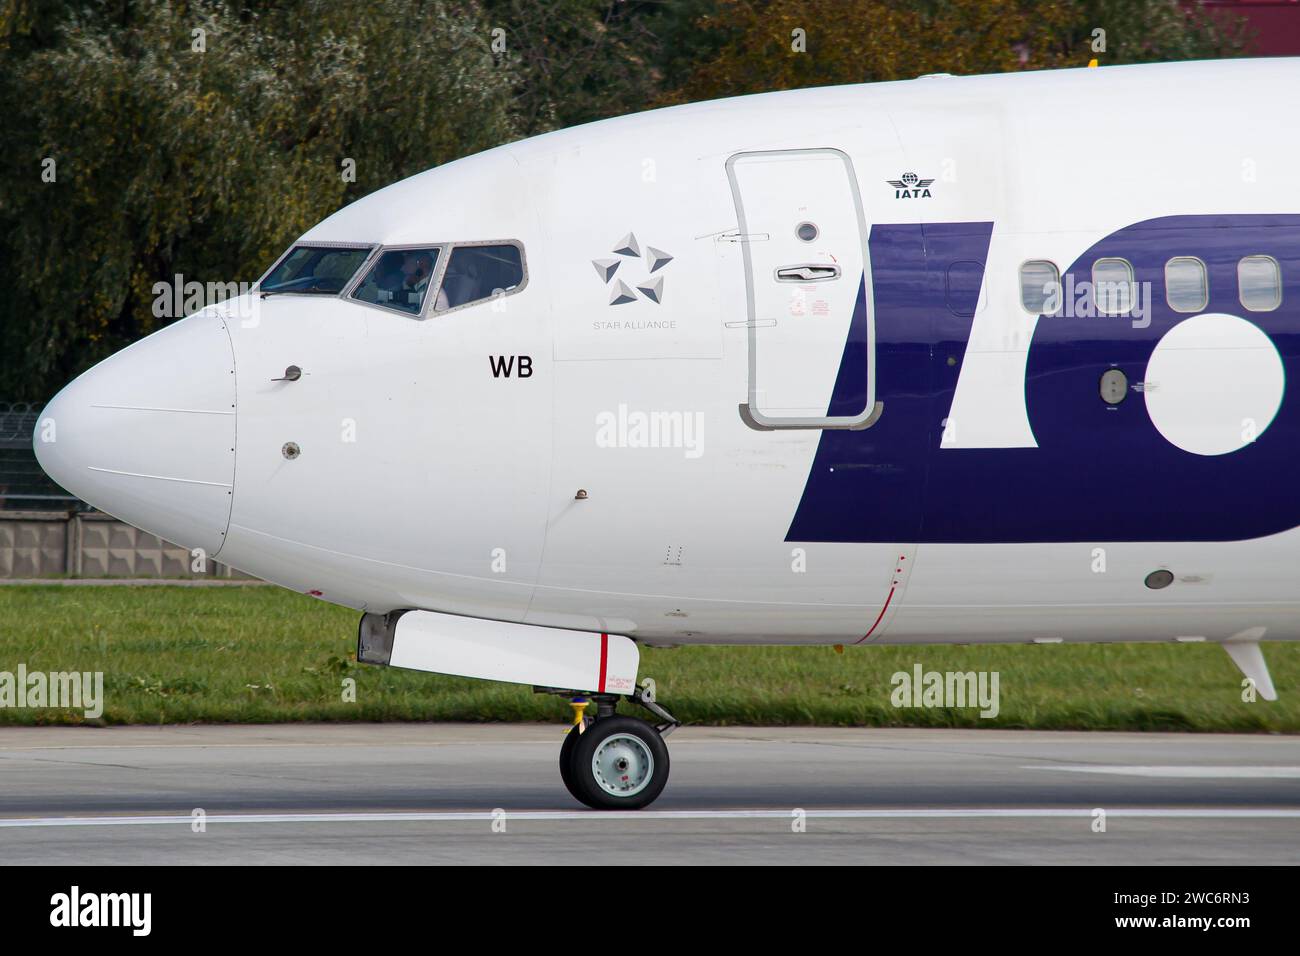 LOT Polish Airlines Boeing 737-800 cockpit close-up while taxiing after landing in Lviv Stock Photo